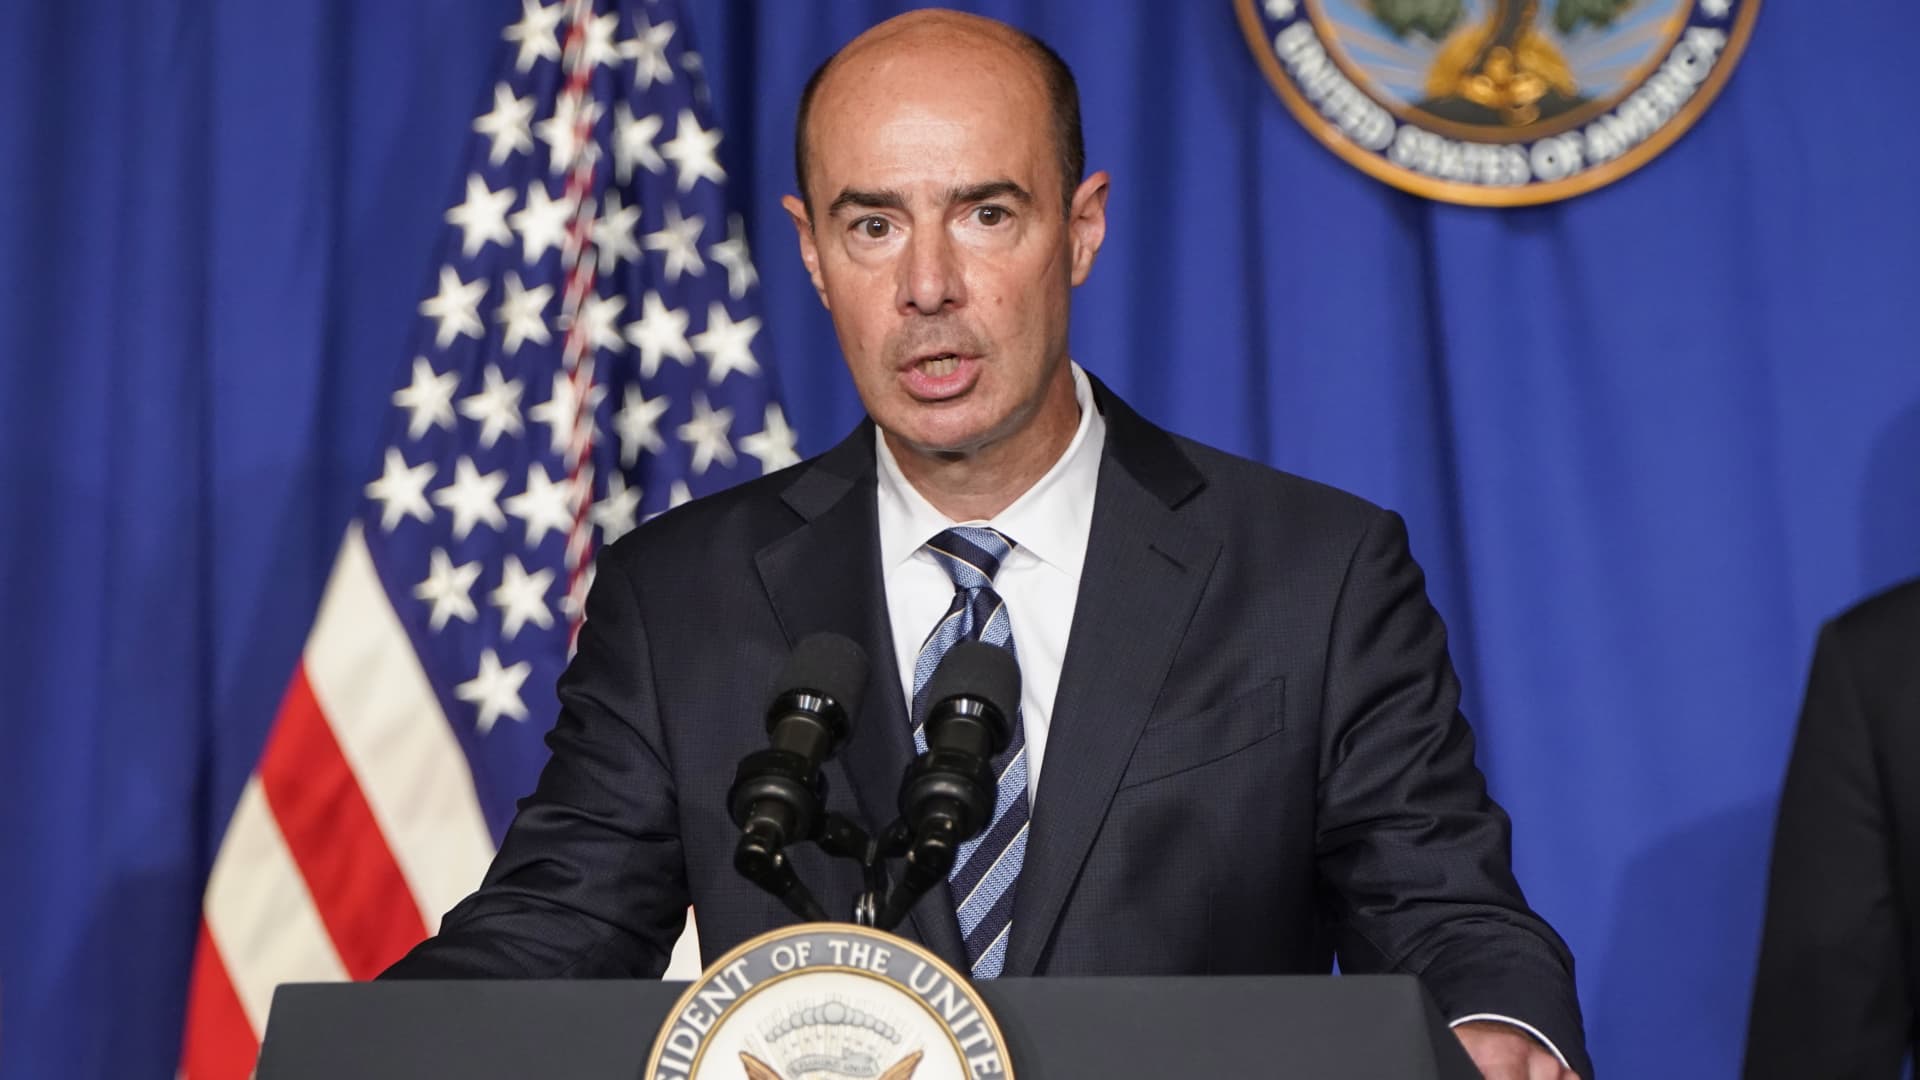 Eugene Scalia, U.S. secretary of labor, speaks during a White House Coronavirus Task Force briefing at the Department of Education in Washington, D.C., U.S., on Wednesday, July 8, 2020.